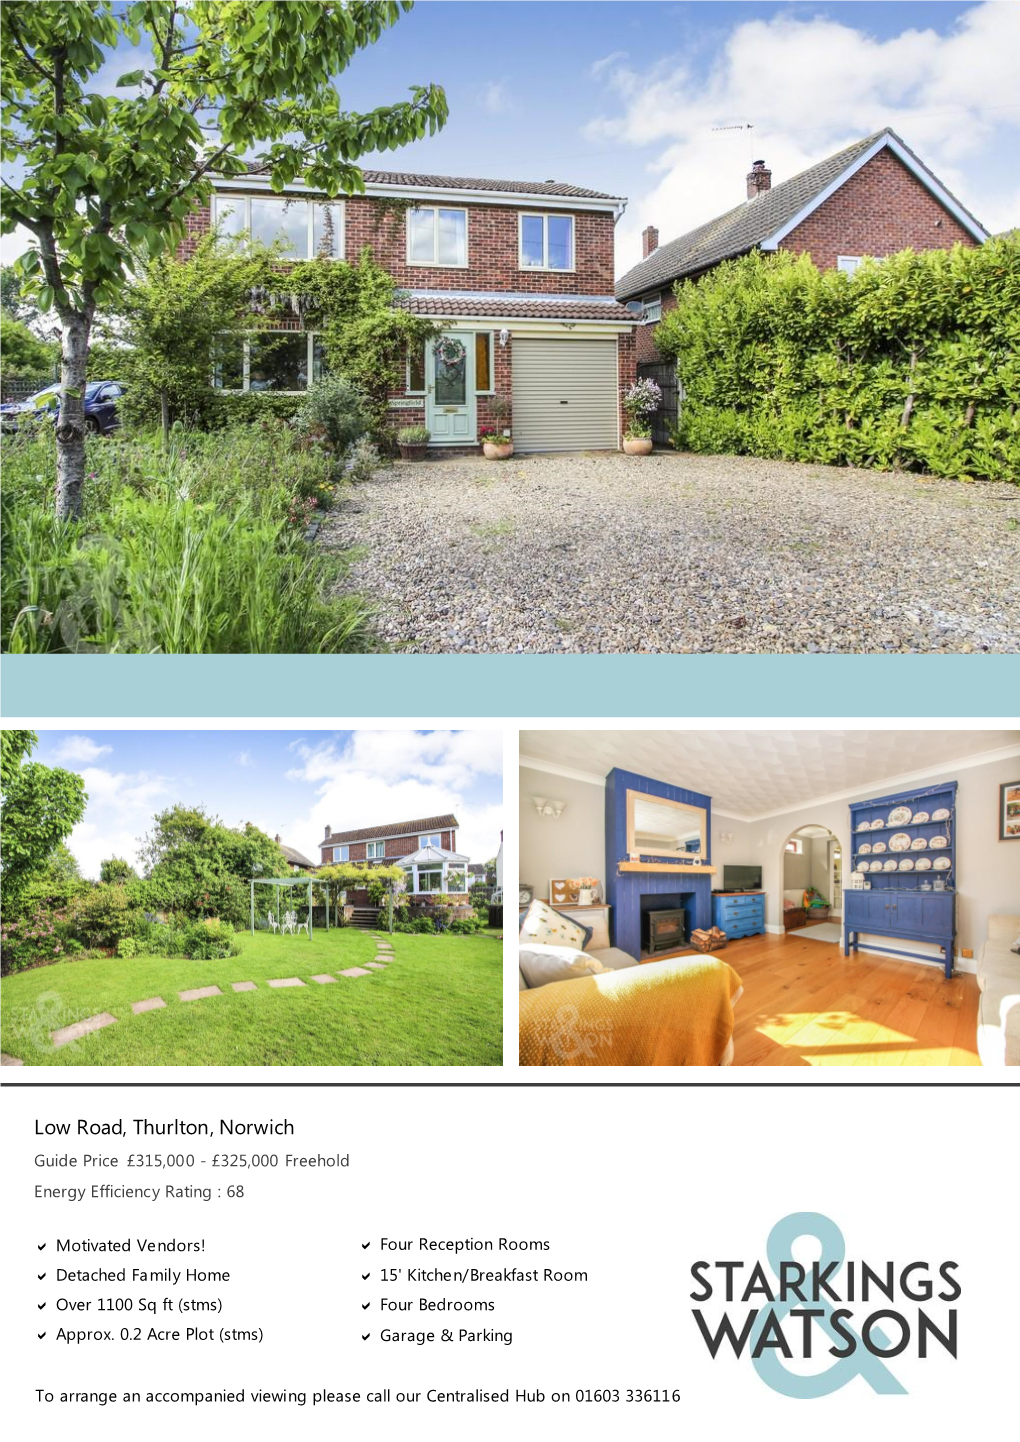 Low Road, Thurlton, Norwich Guide Price £315,000 - £325,000 Freehold Energy Efficiency Rating : 68